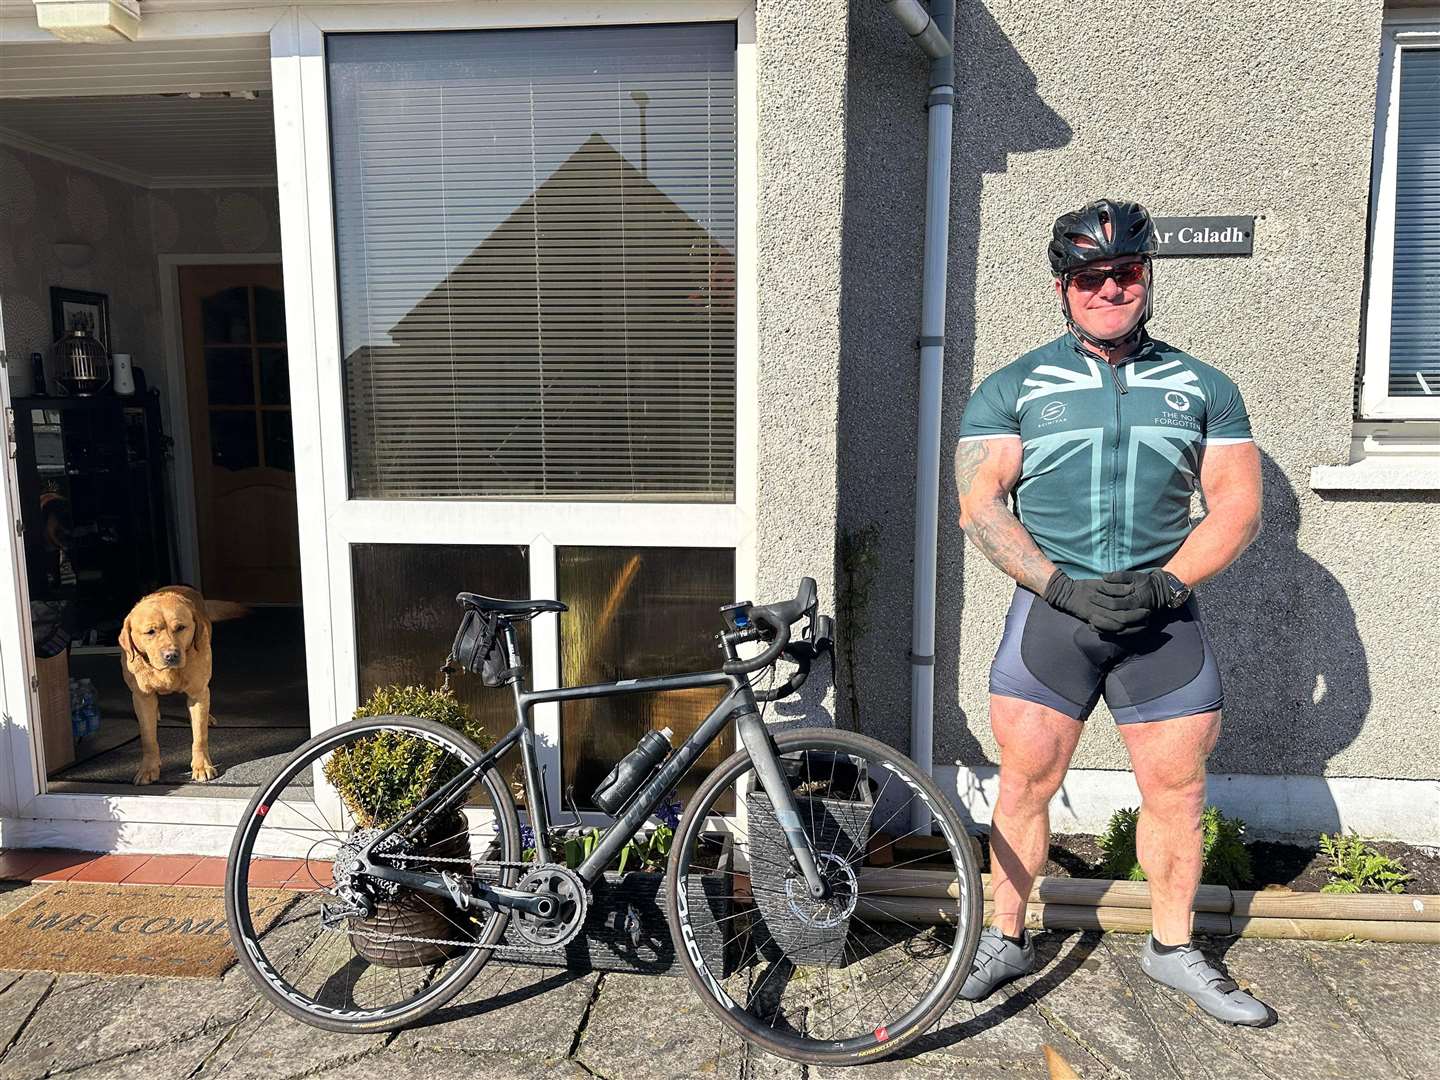 Kev Stewart is training hard for a series of fundraising cycling challenges and says he feels ‘a lot fitter this year’.